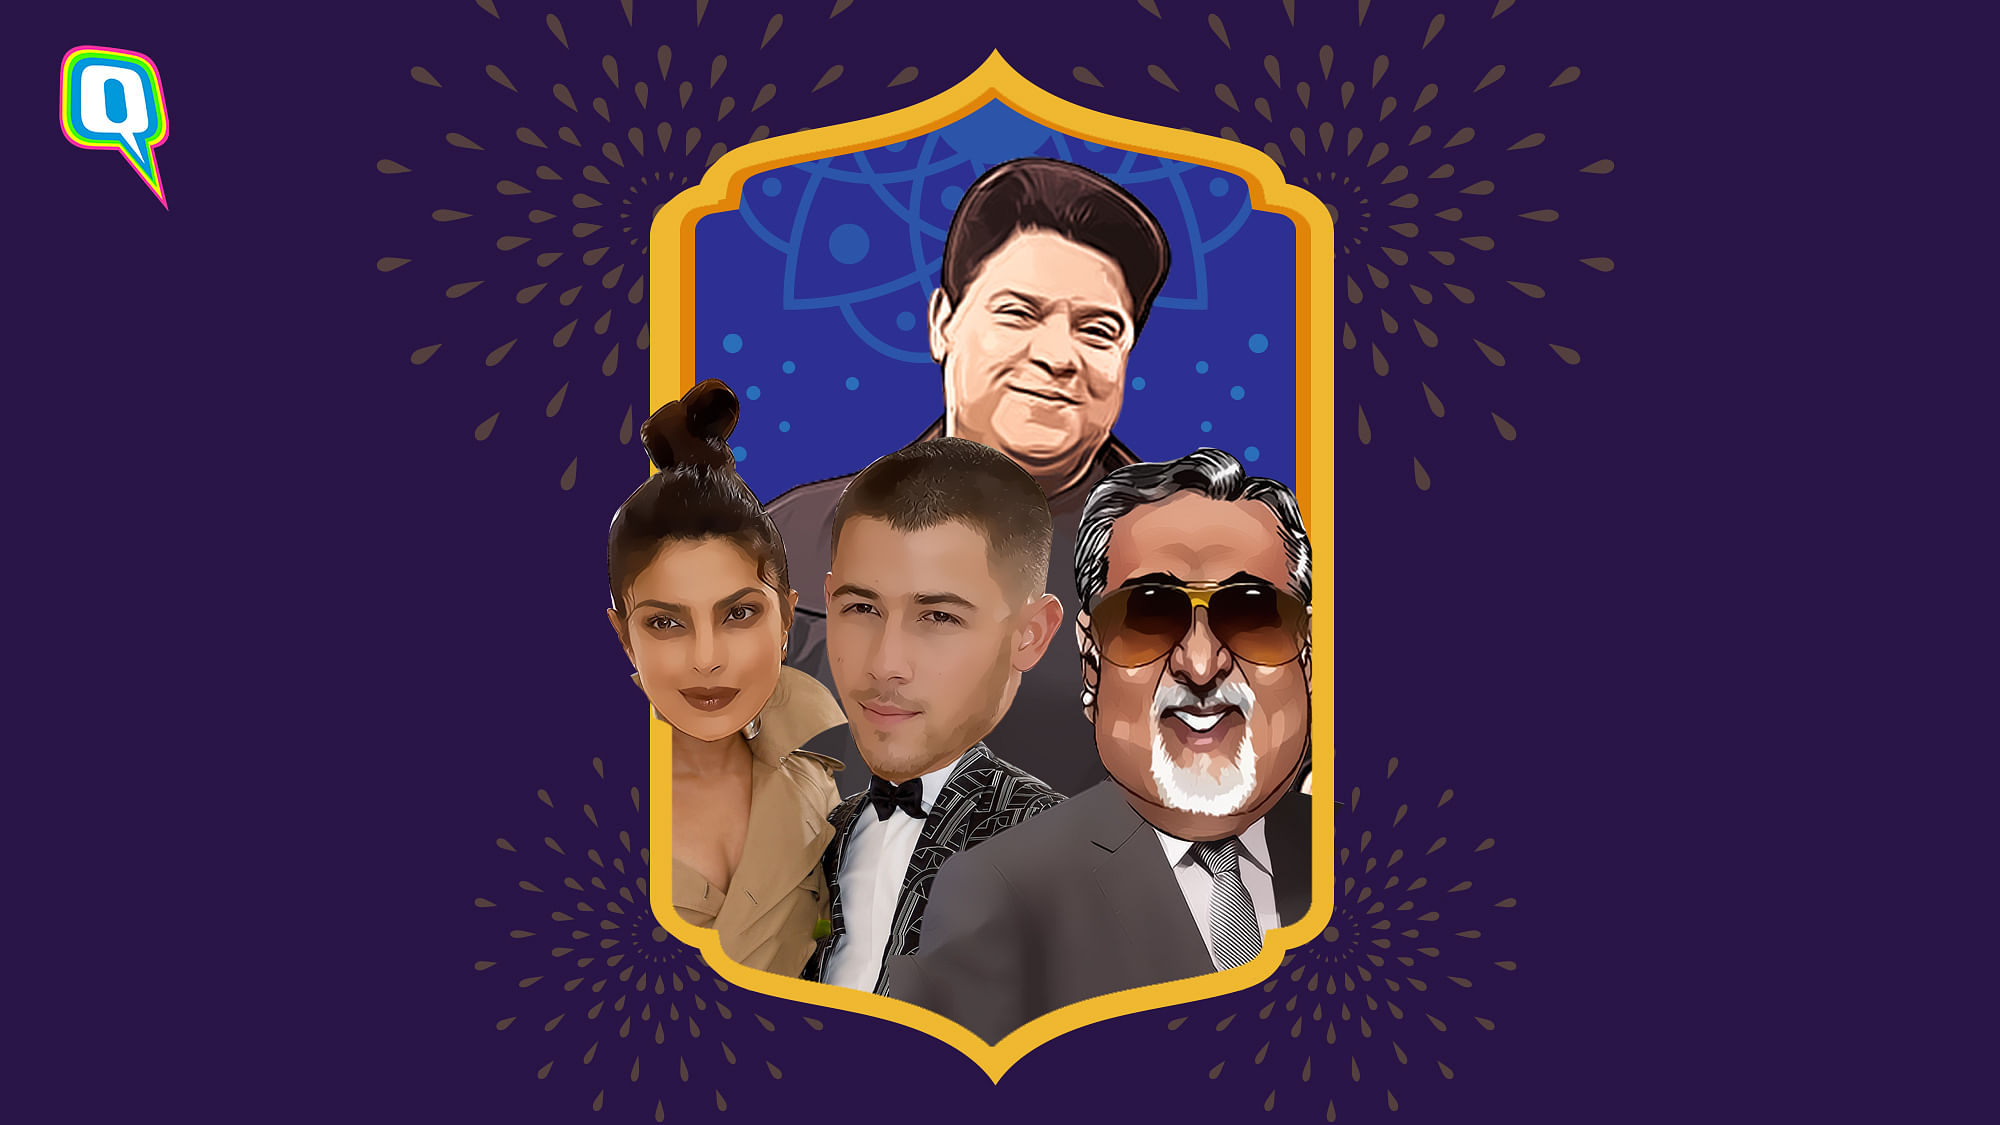 The Big Diwali bonanza is here for the biggest newsmakers of India!